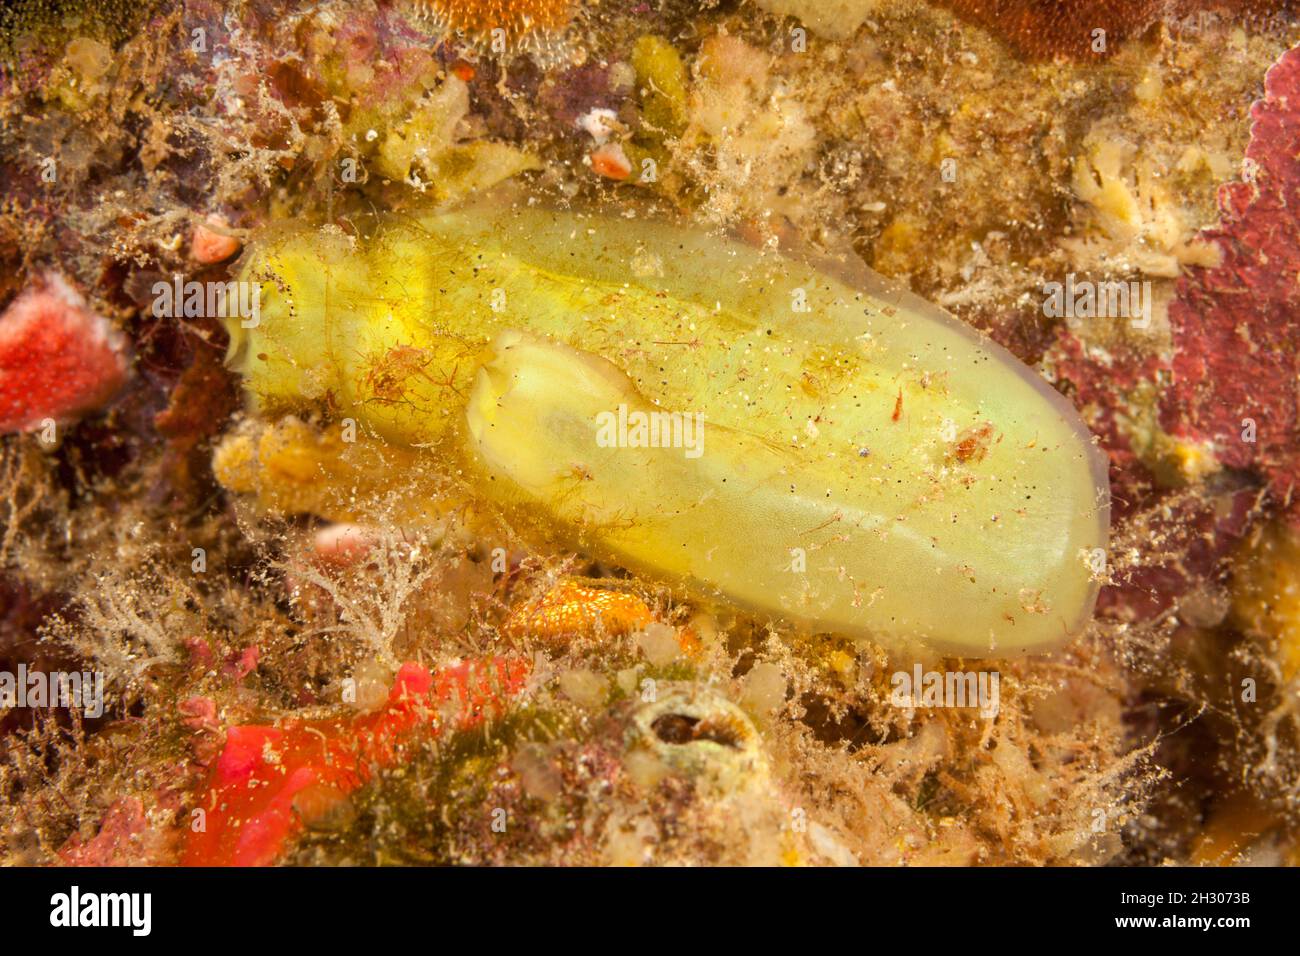 The yellow green tunicate, Ascidea sydneiensis, or sea squirt, is solitary and one of just a few of this type found in Hawaii. Stock Photo